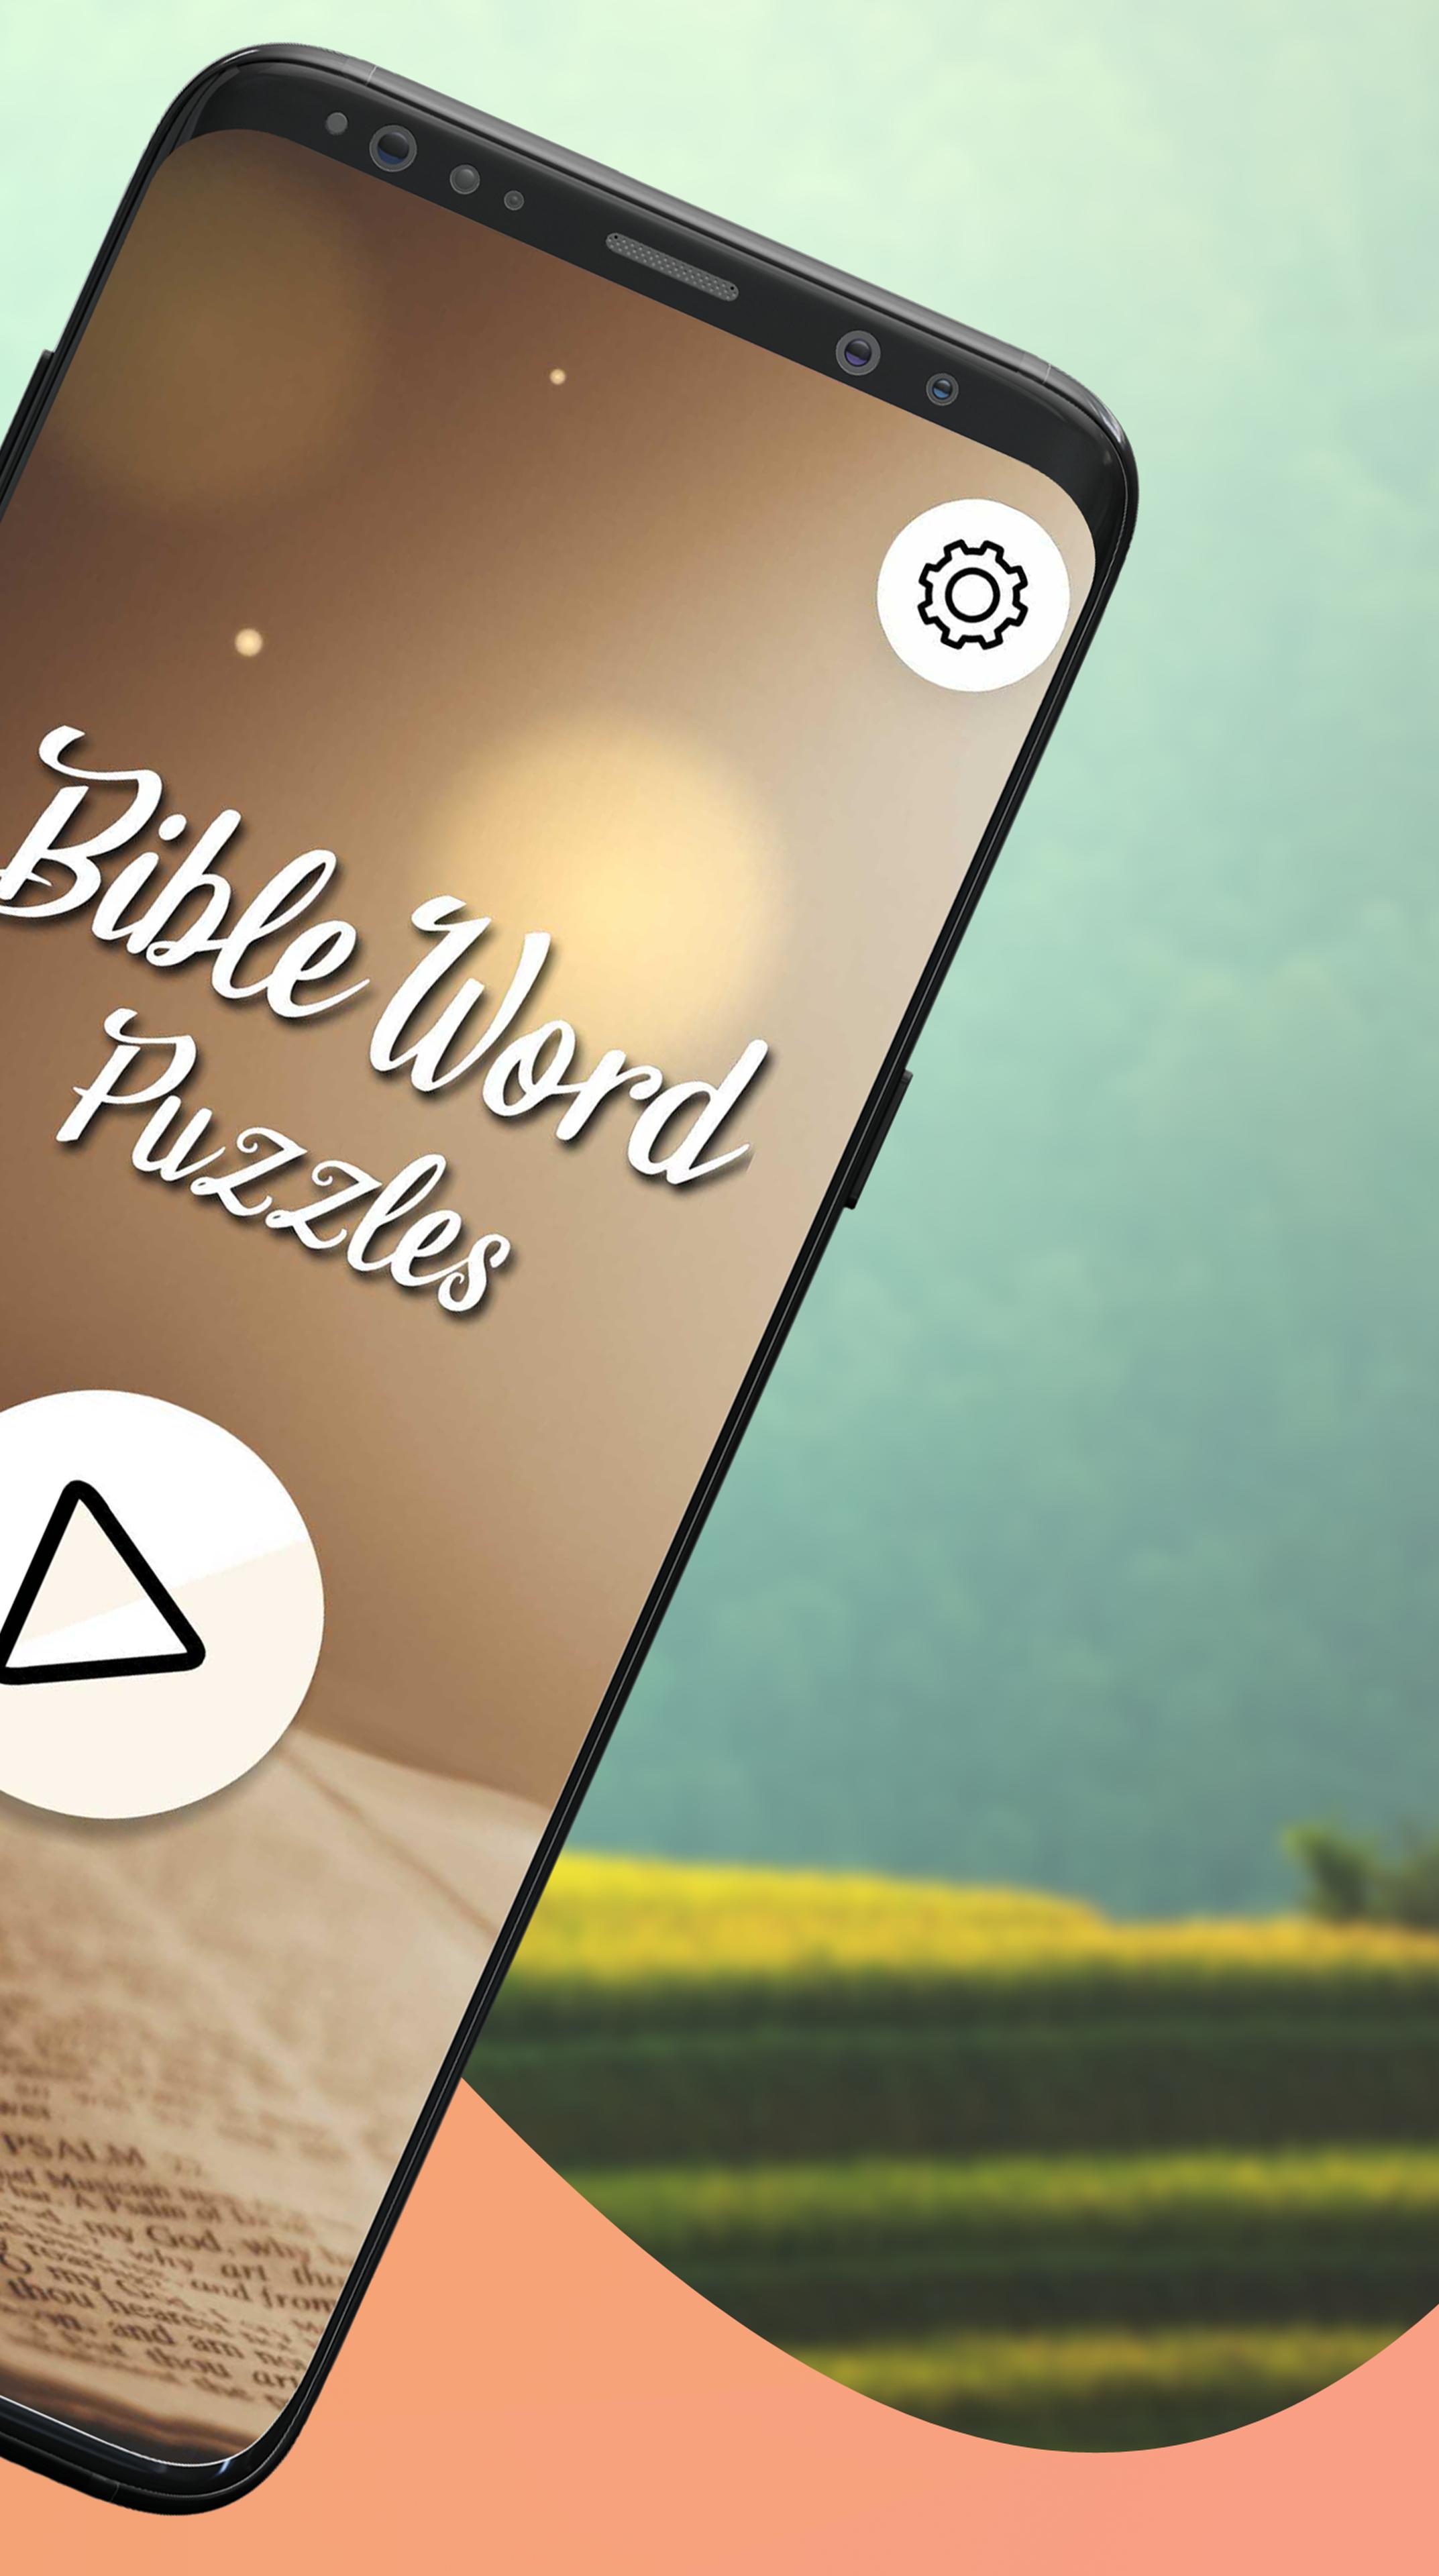 Bible Word Puzzle Games: Verse Search & Cross Word 4.5 Screenshot 12